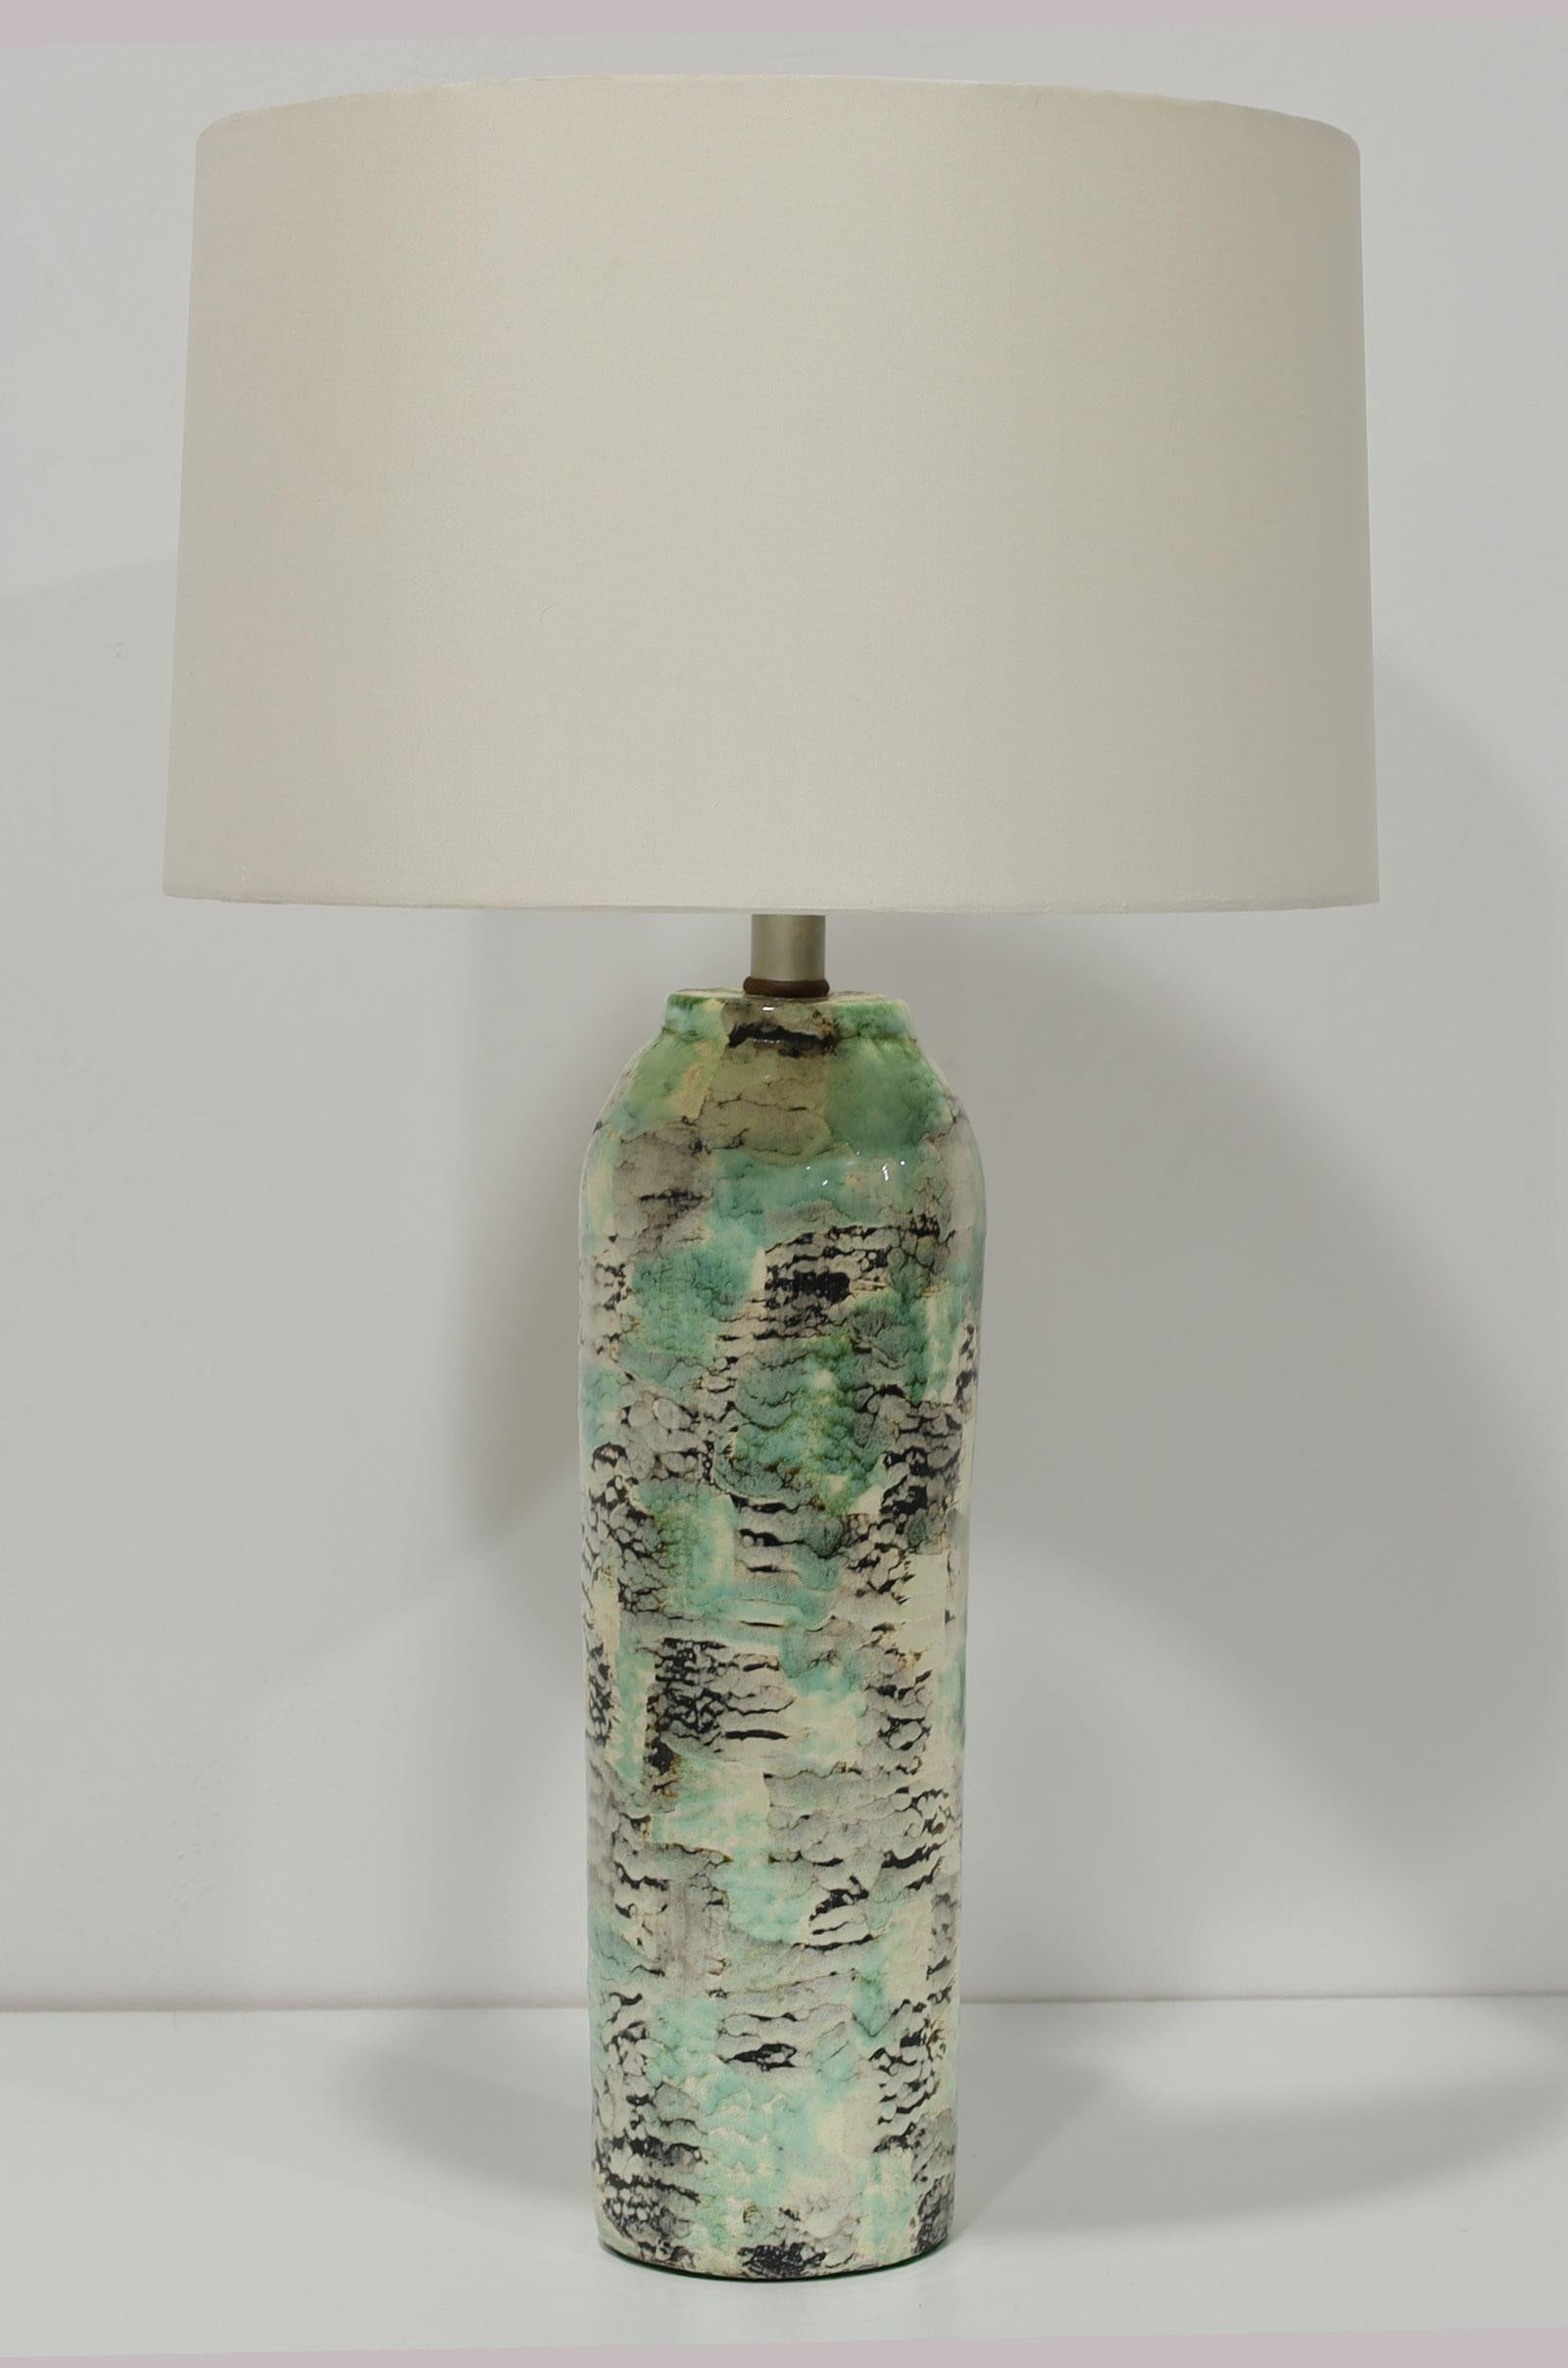 This is a unique lamp by Kelby. The lamp is circular drum shape with an abstract design in greens, black and cream or off-white. The ceramic height is 17.5